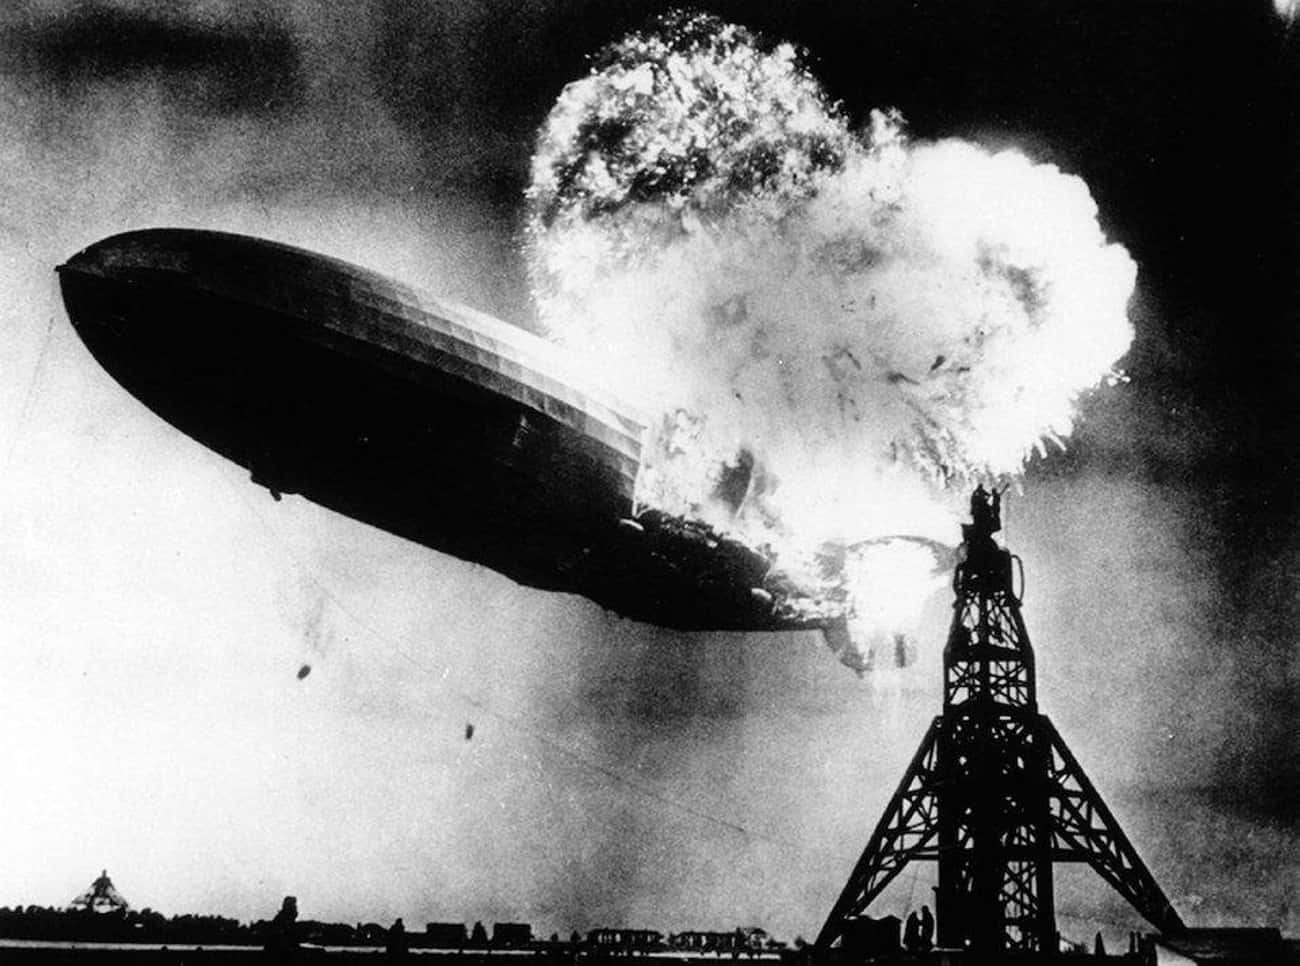 The New Jersey Hindenburg Disaster, May 6, 1937